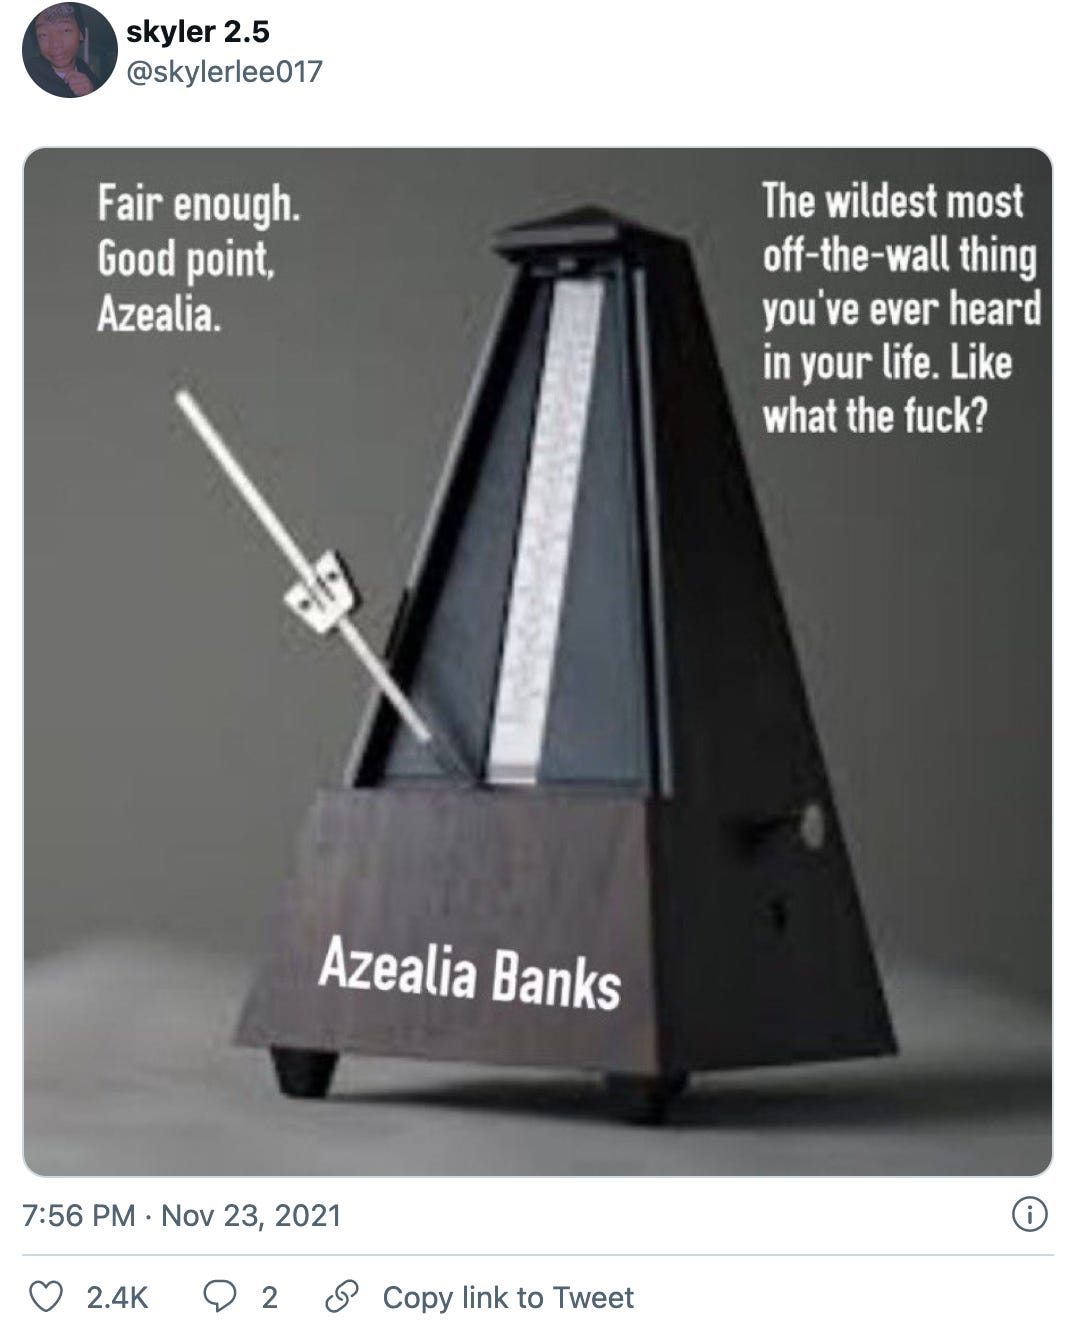 Tweet by @skylerlee017 with a picture of a metronome labeled “Azealia Banks,” and the needle‘s pointing to one side which is labeled “Fair enough. Good point, Azealia.” while the other side is labeled “The wildest most off-the-wall thing you’ve ever heard in your life. Like what the fuck?”